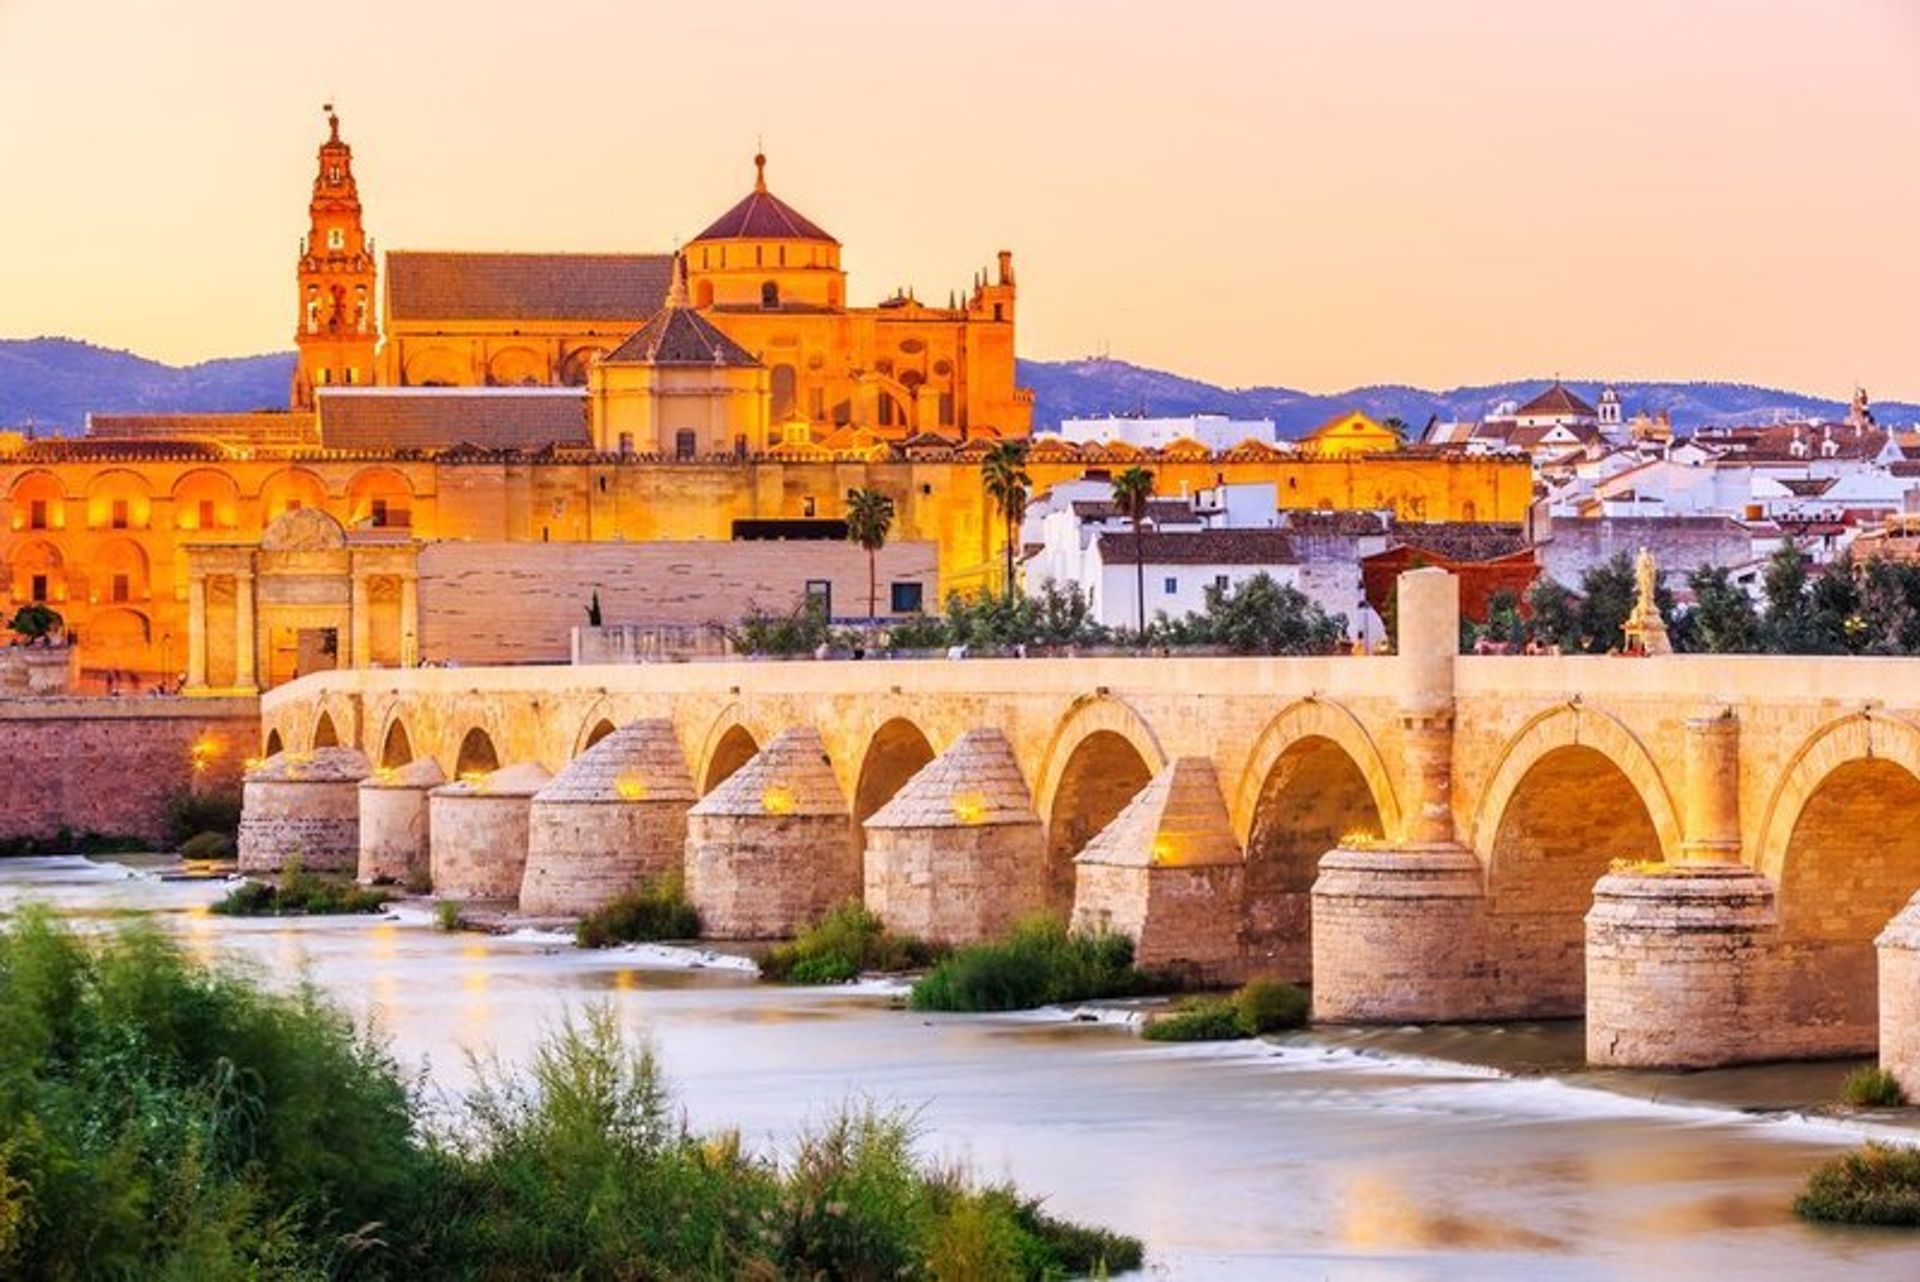 Roman bridge and the Mosque-Cathedral of Cordoba in Andalucia